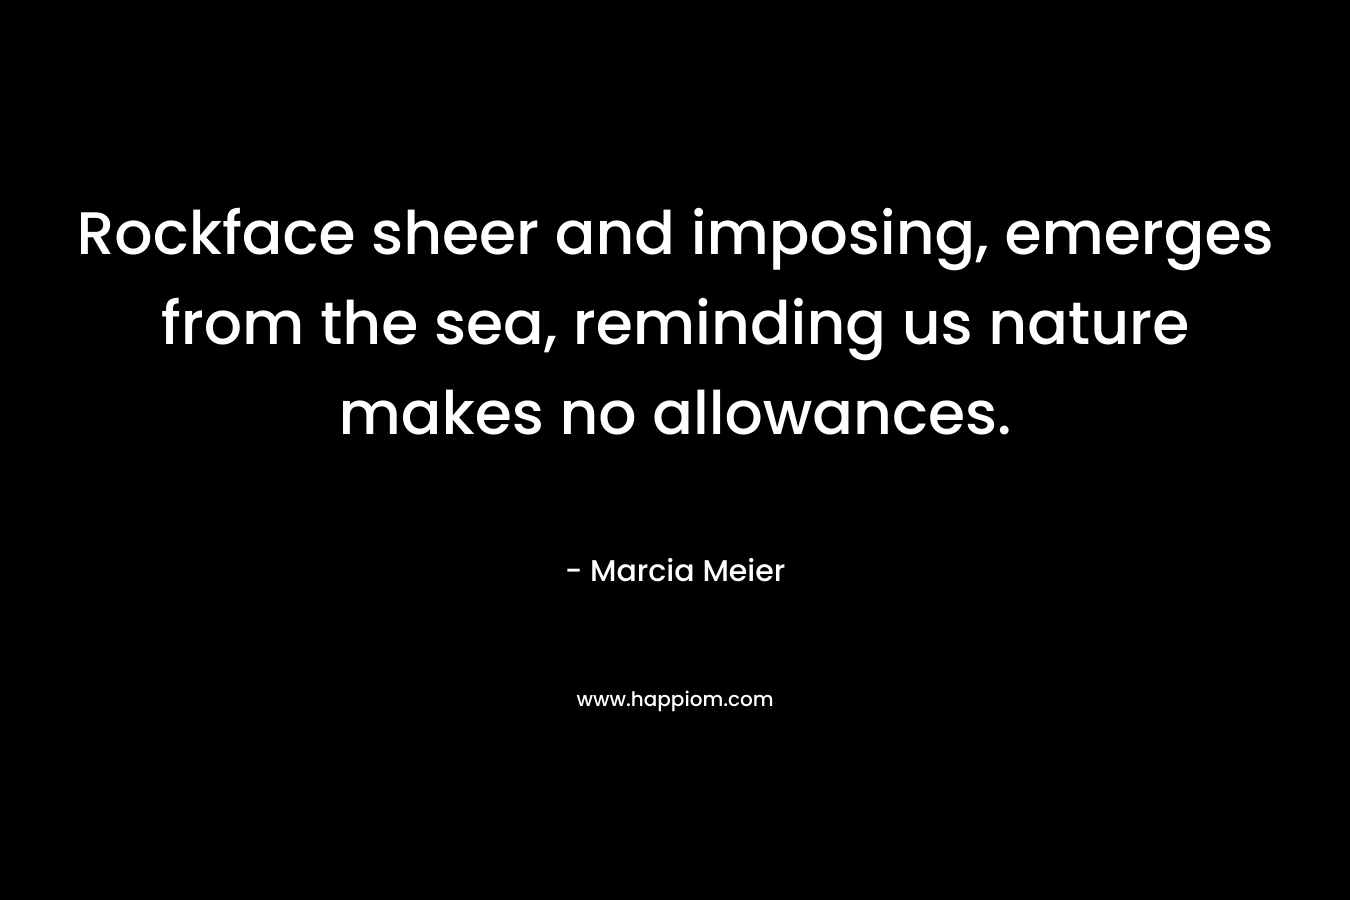 Rockface sheer and imposing, emerges from the sea, reminding us nature makes no allowances. – Marcia Meier